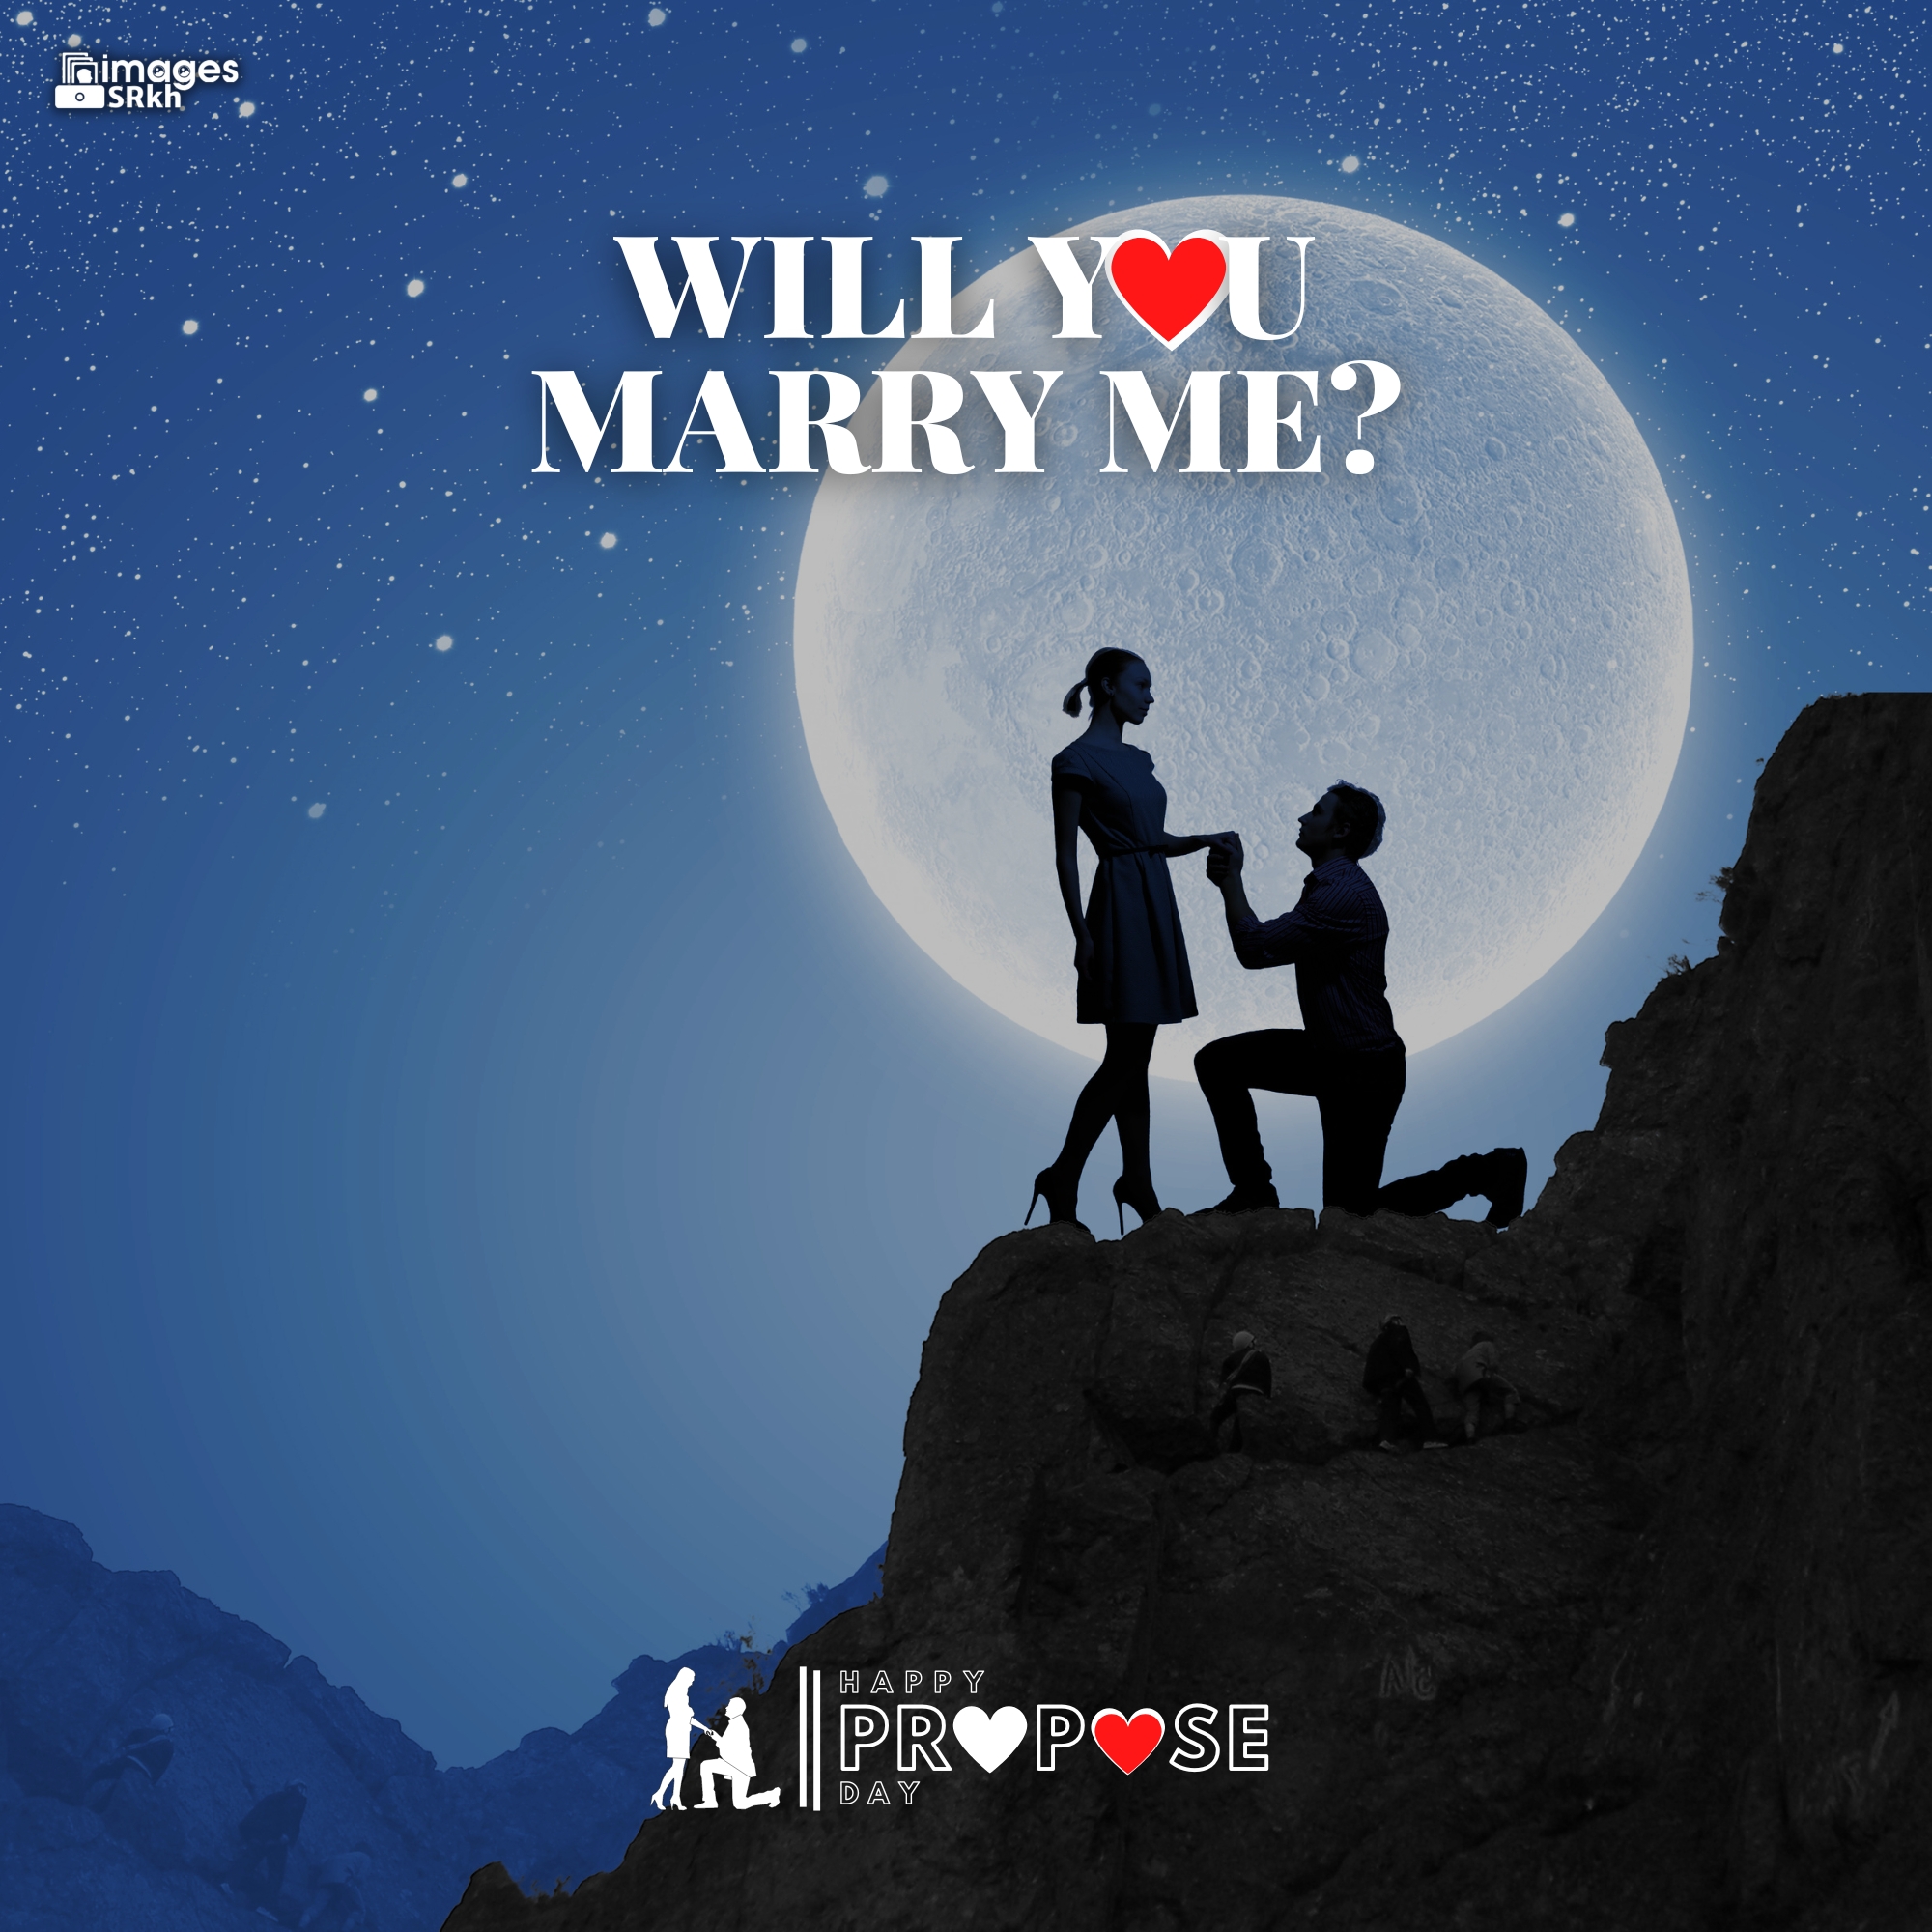 Propose Day Images | 295 | Will You MARRY ME